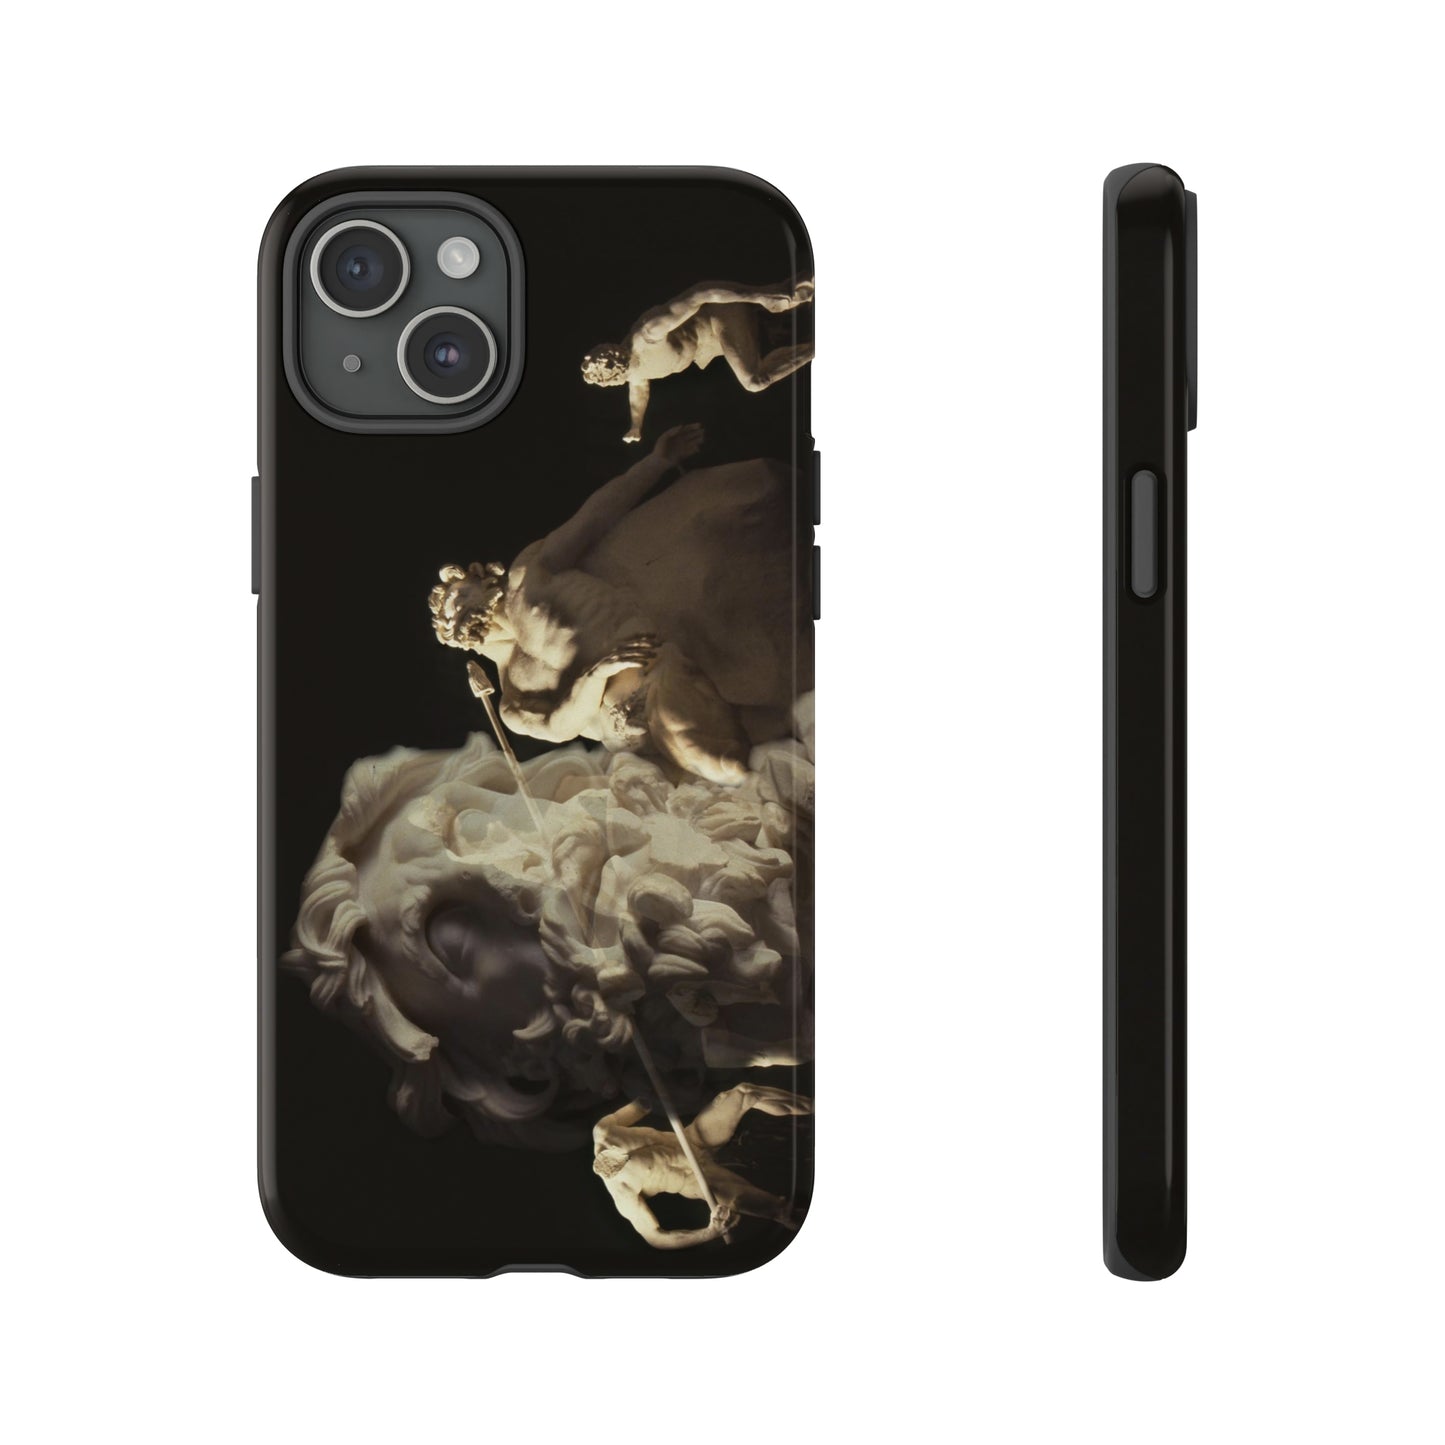 Ulysses and Polyphemus Phone Cases